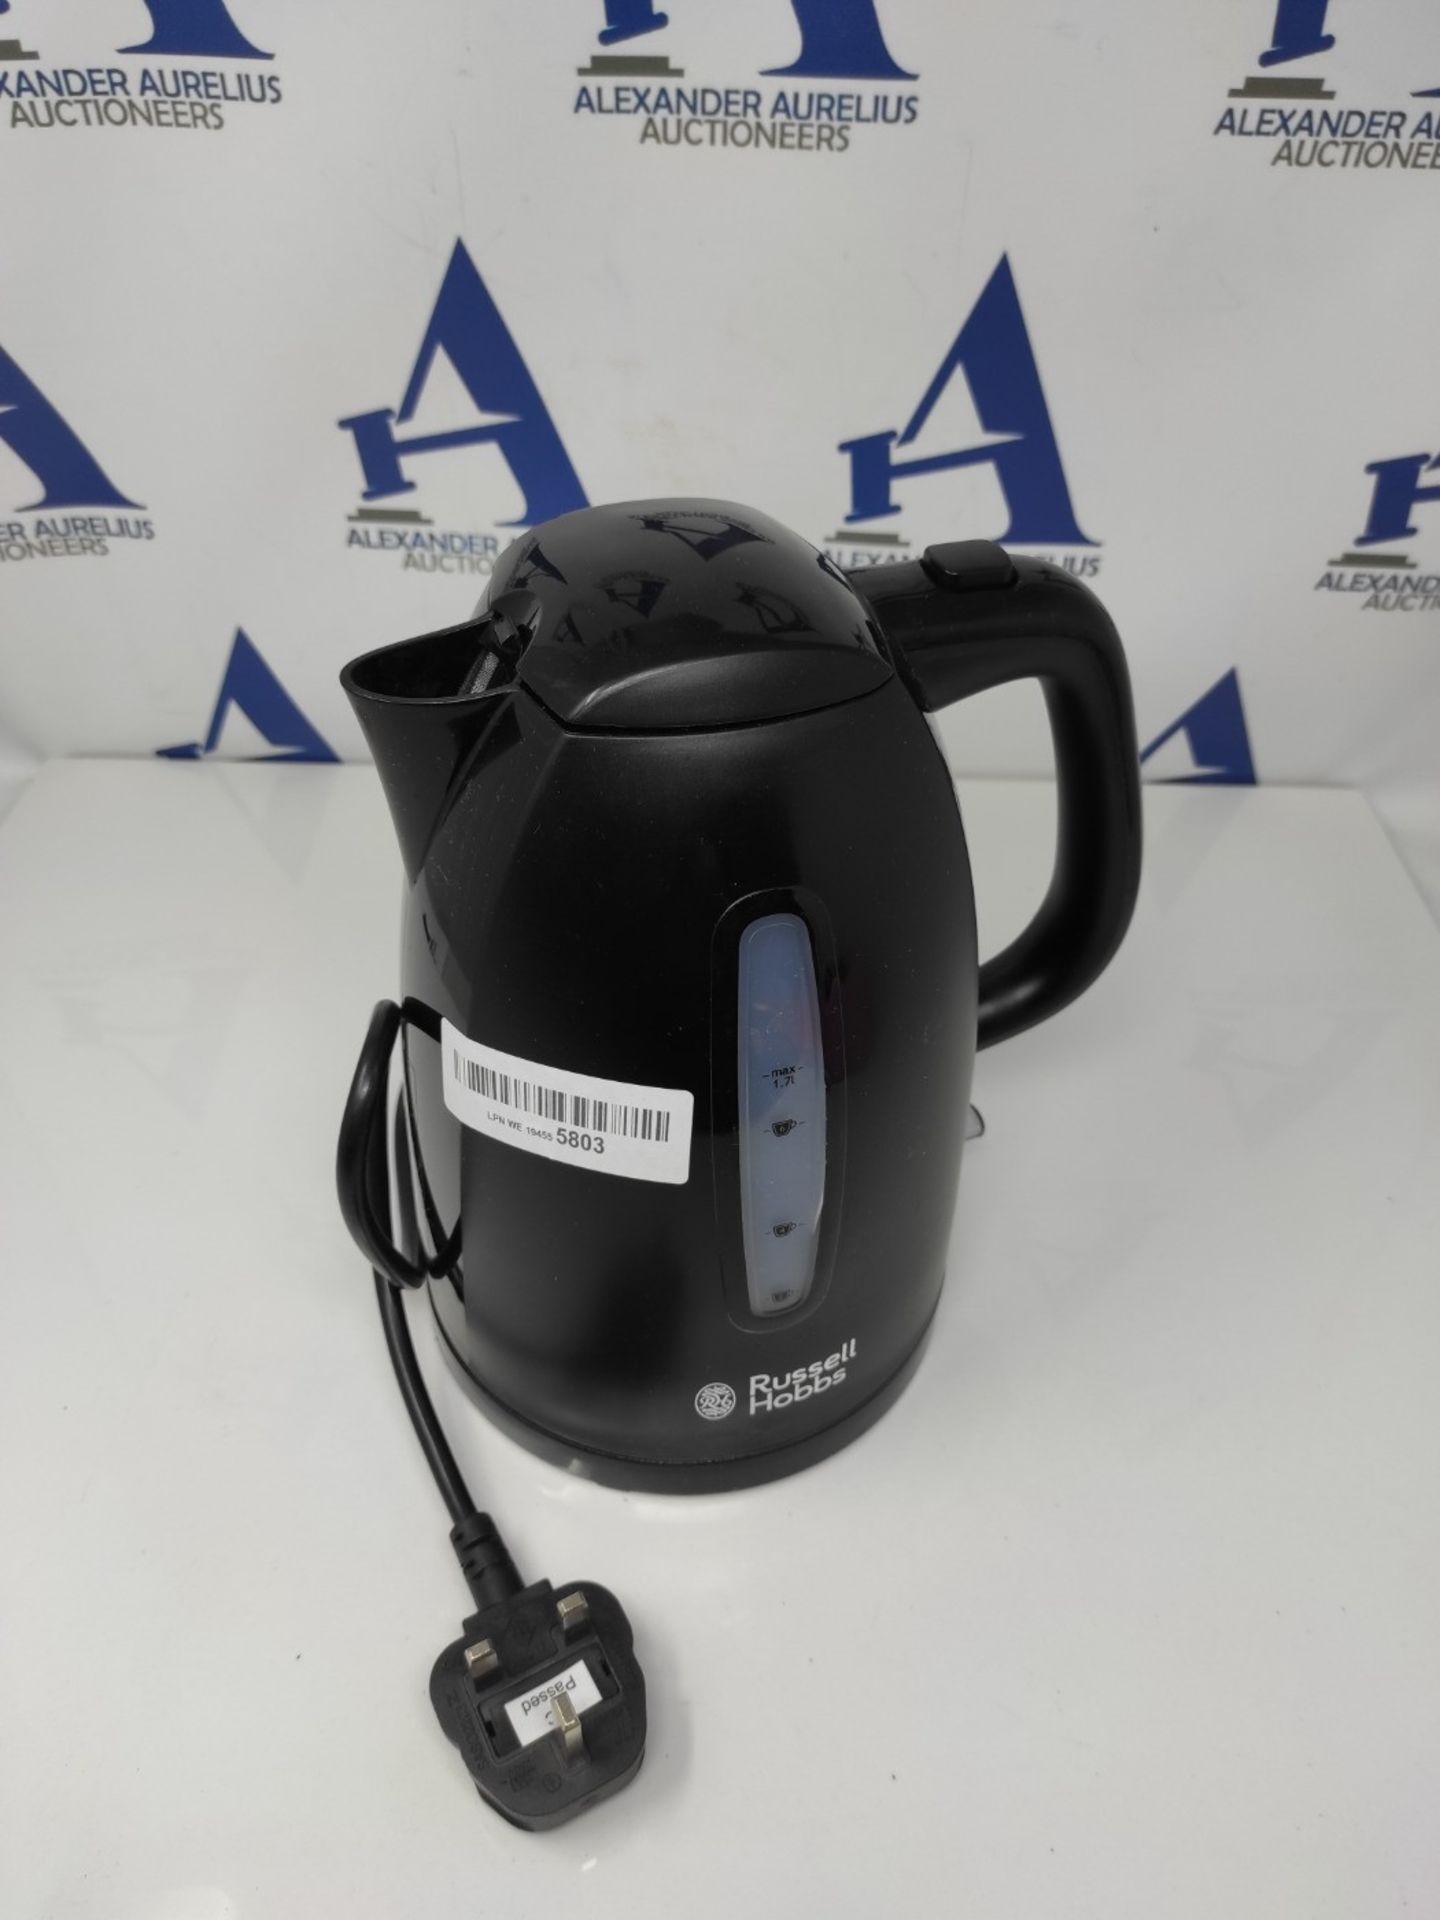 Russell Hobbs Textures Plastic Kettle 21271, 1.7 L, 3000 W - Black - Image 3 of 3